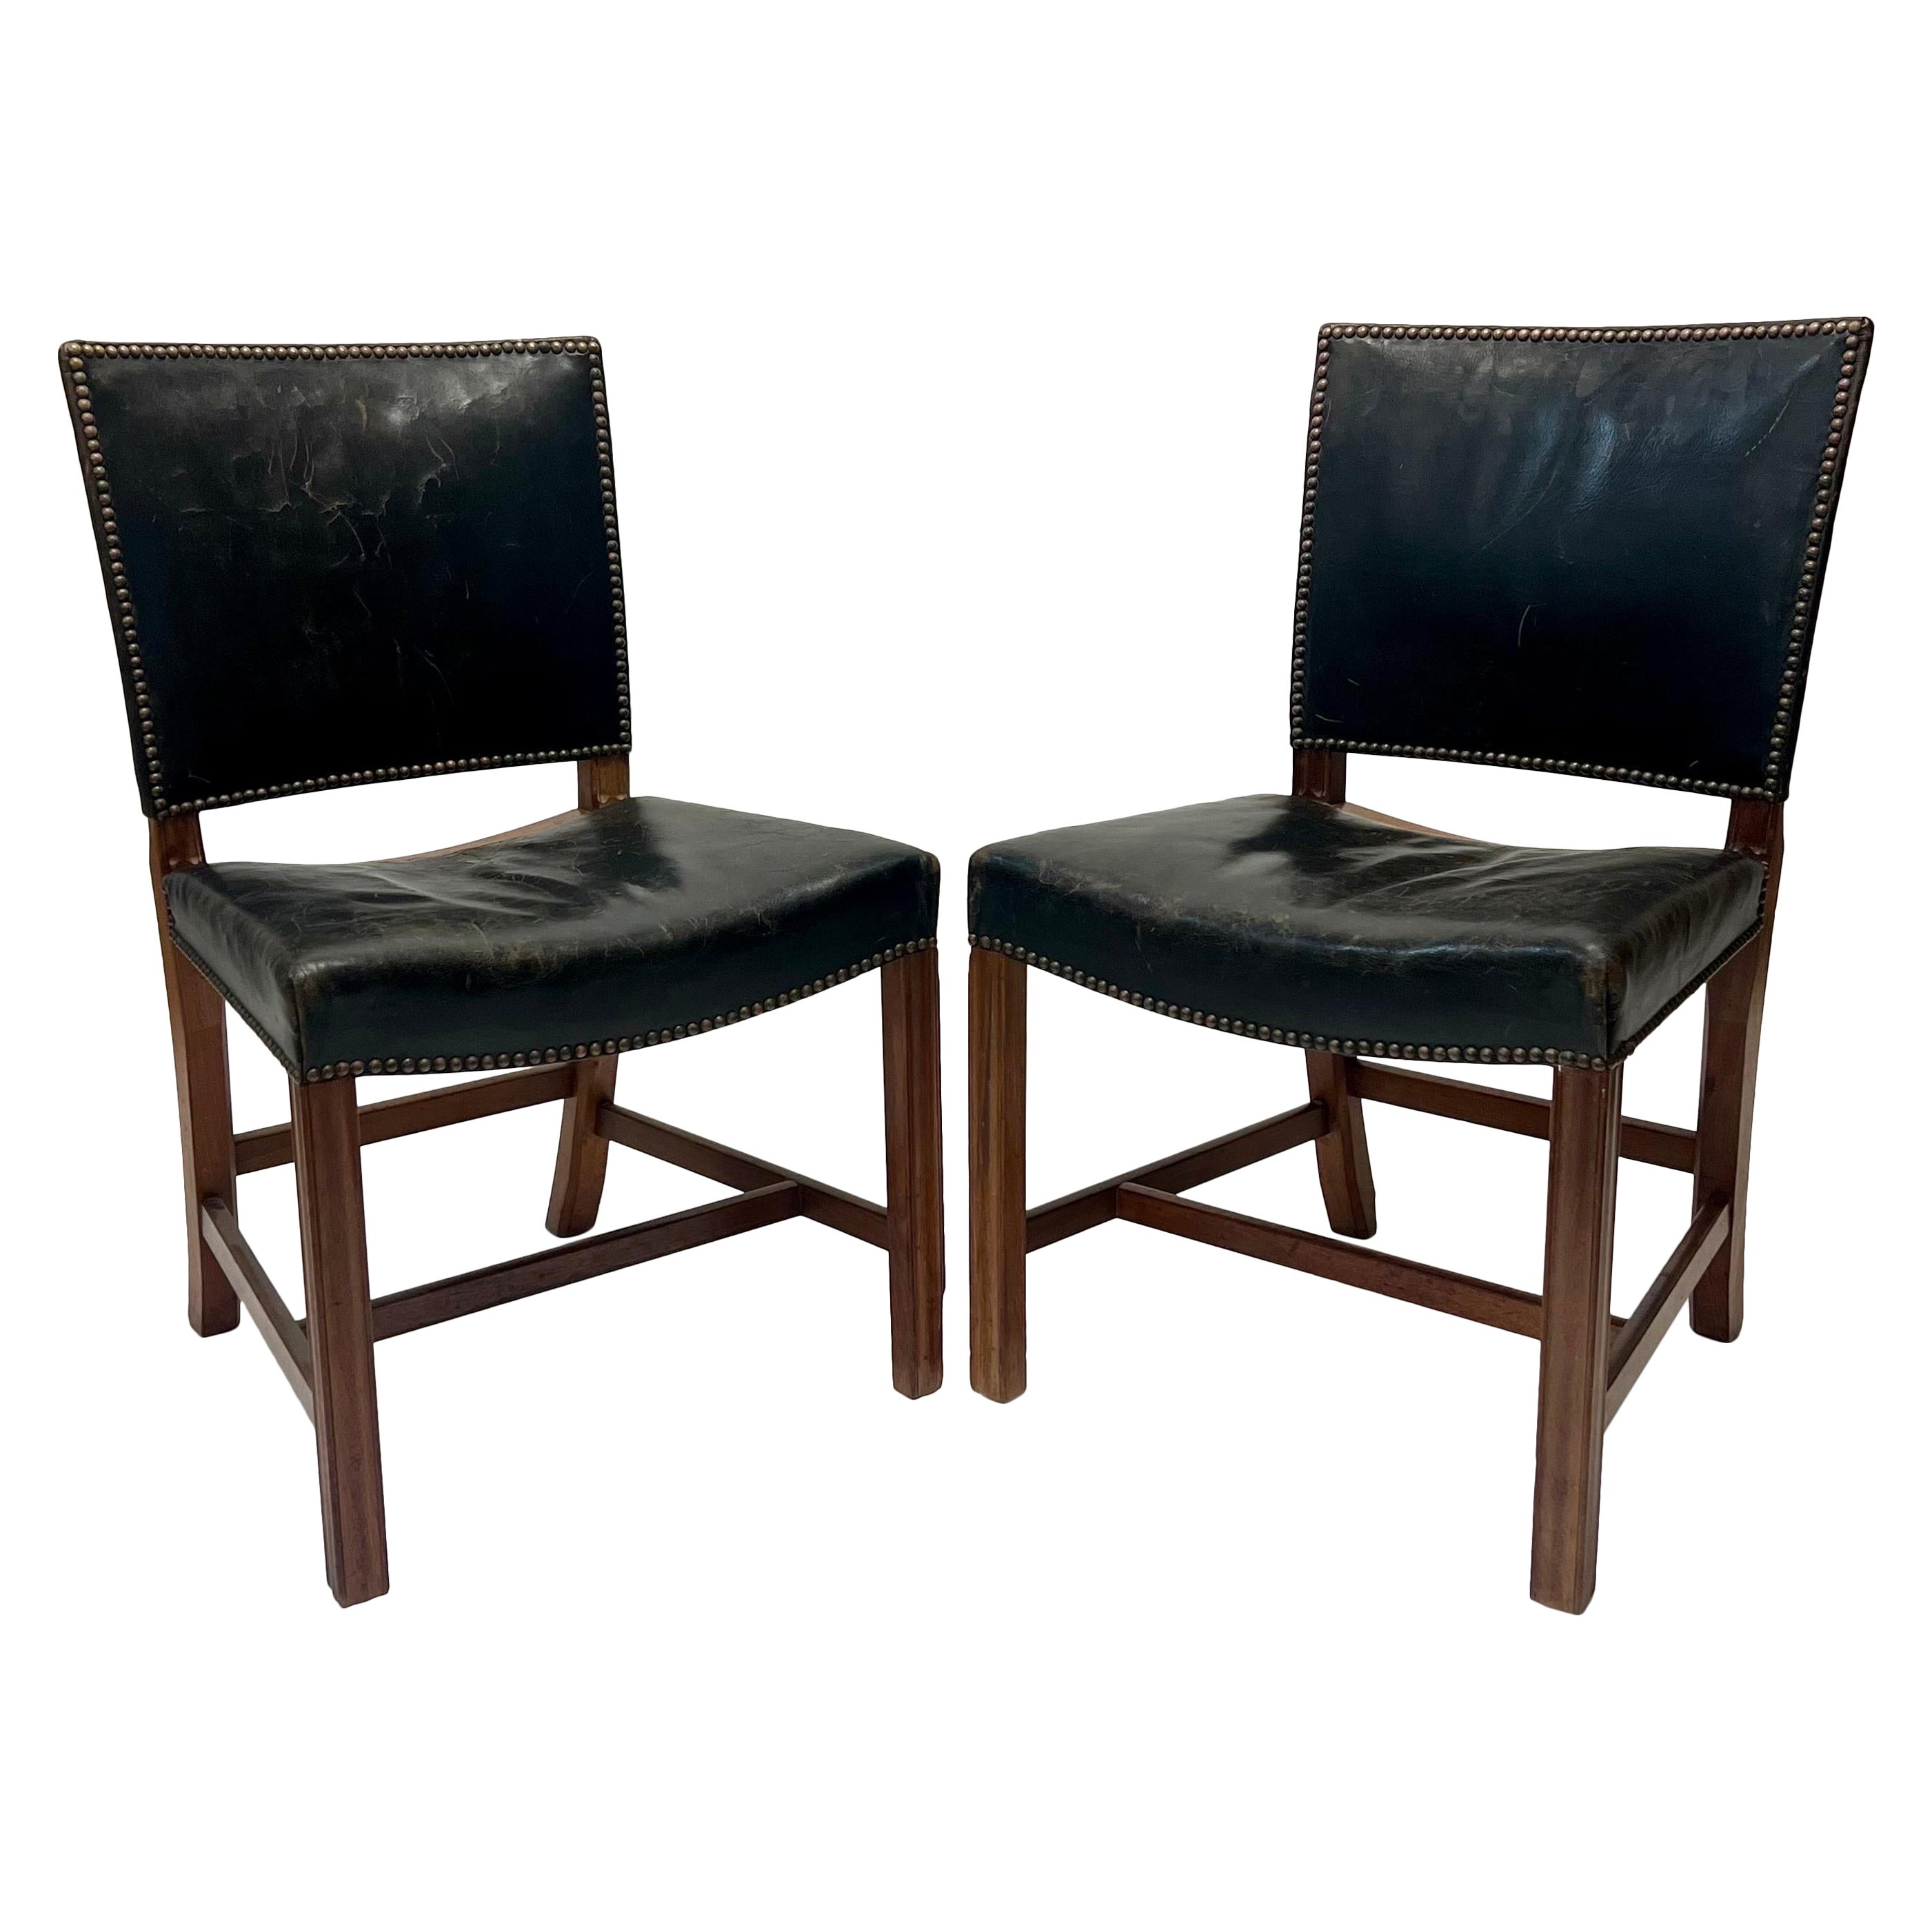 Early Kaare Klint Red Chairs in Cuban Mahogany, circa 1930s